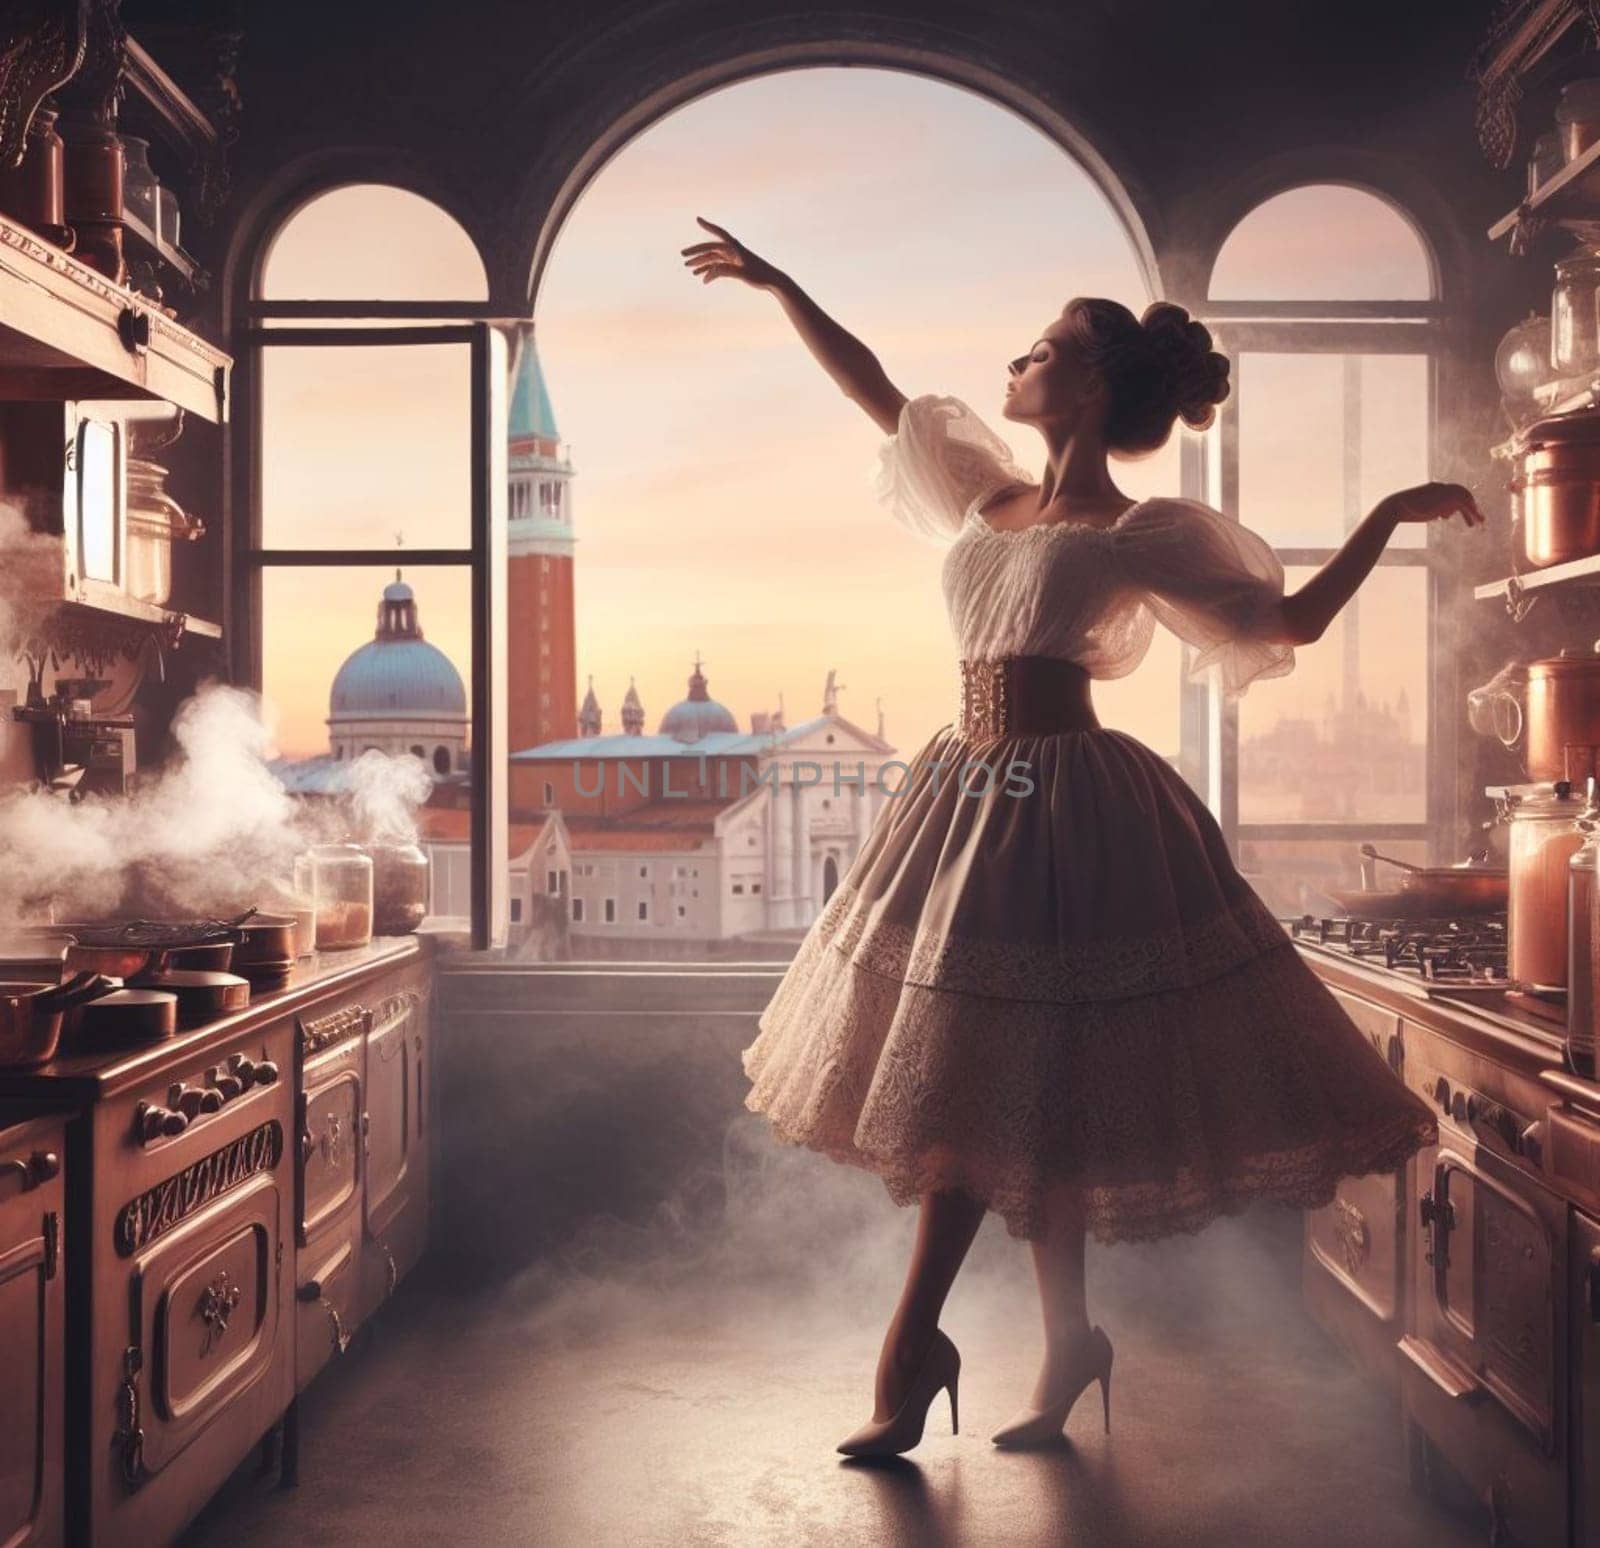 glamourous chef in steampunk kitchen with windiwn natural light cooking posing dancing singing illustration by verbano